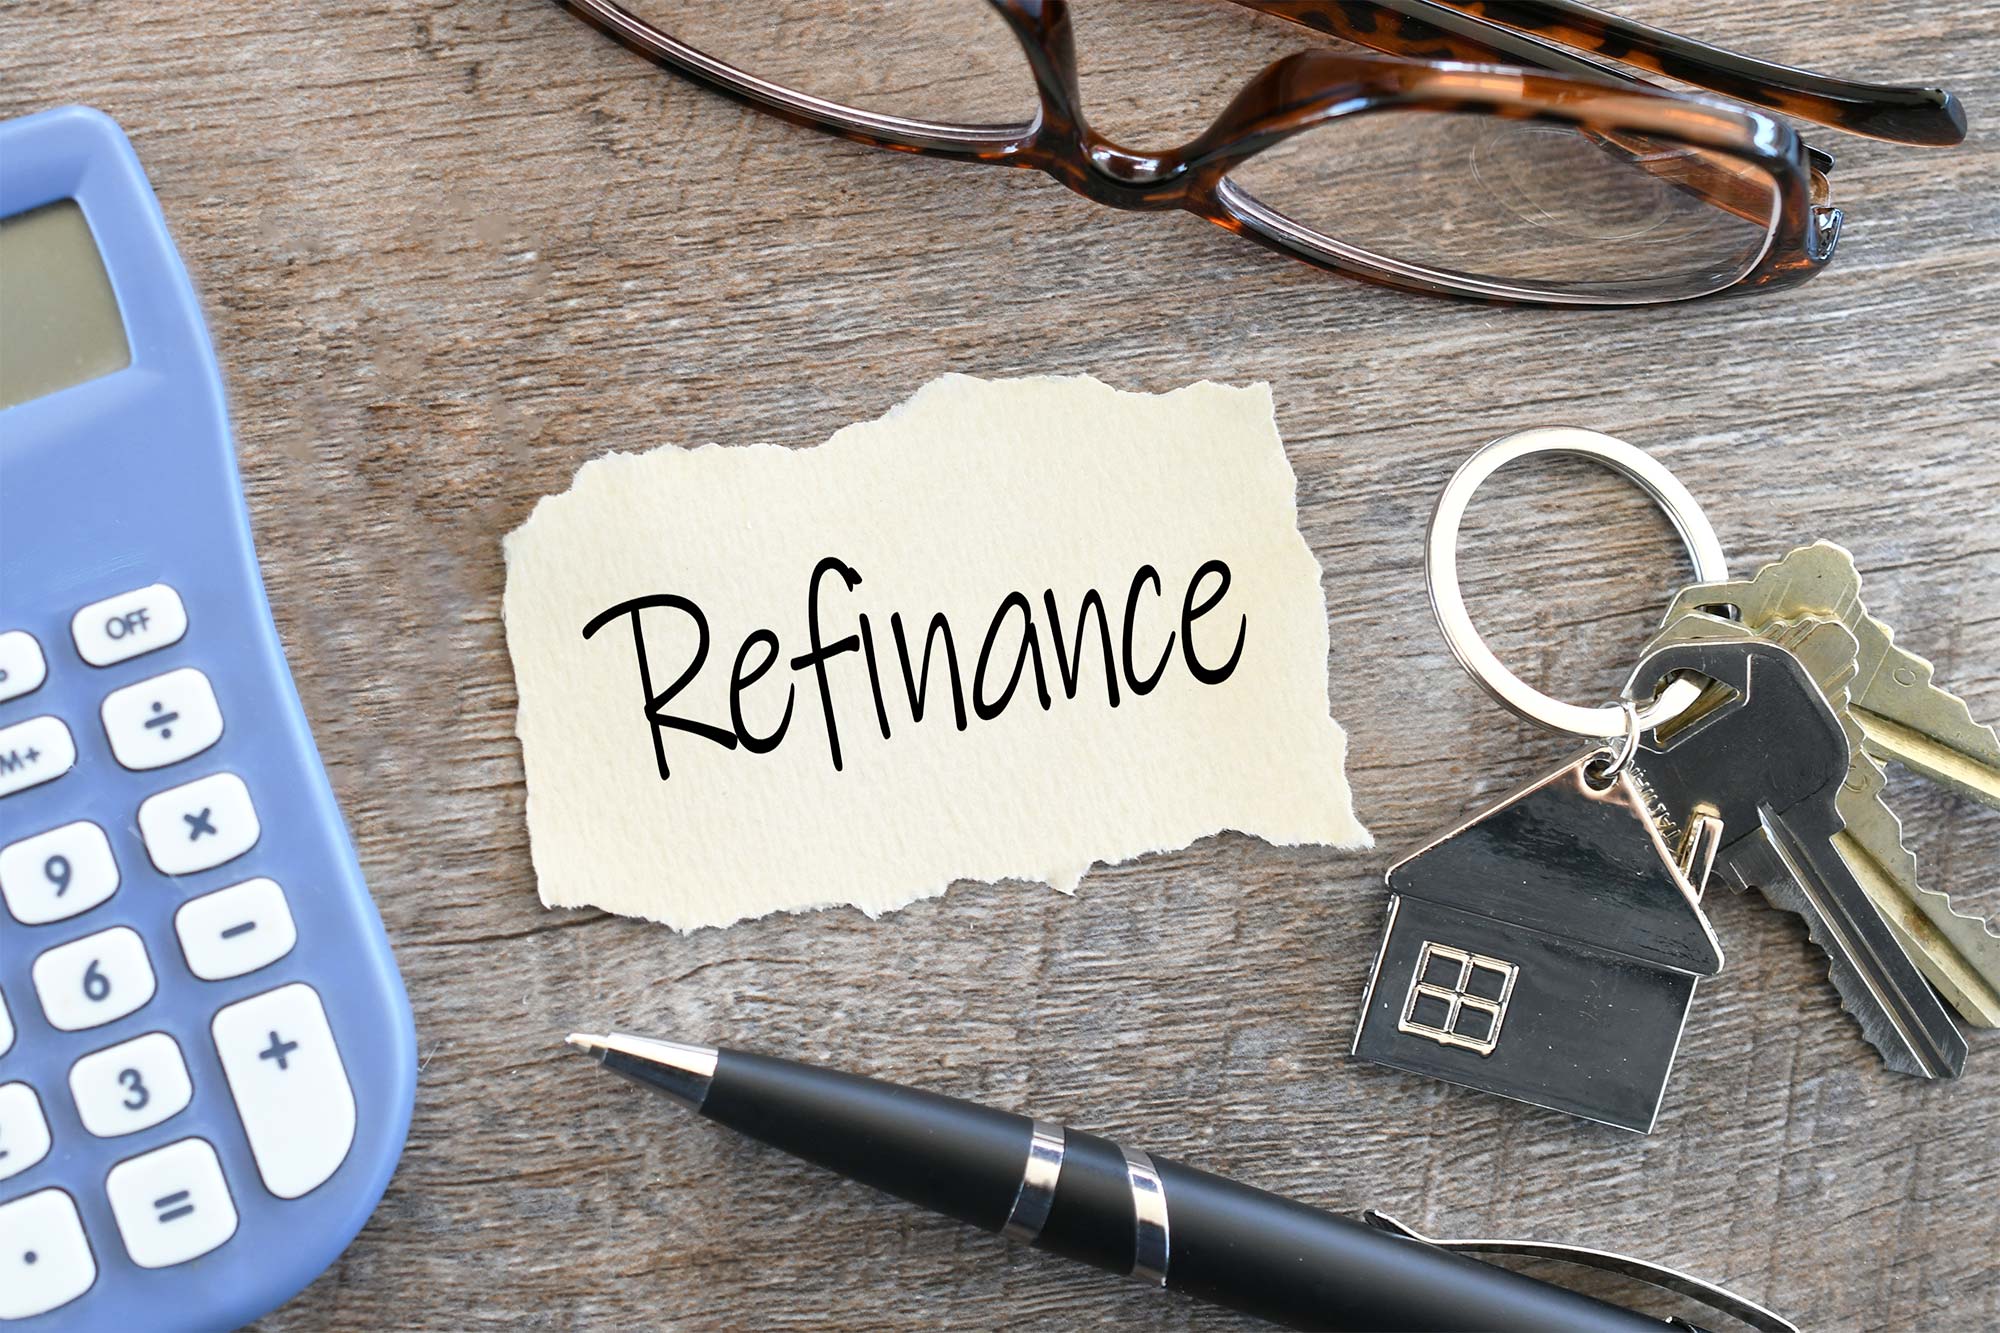 Refinance Your Property